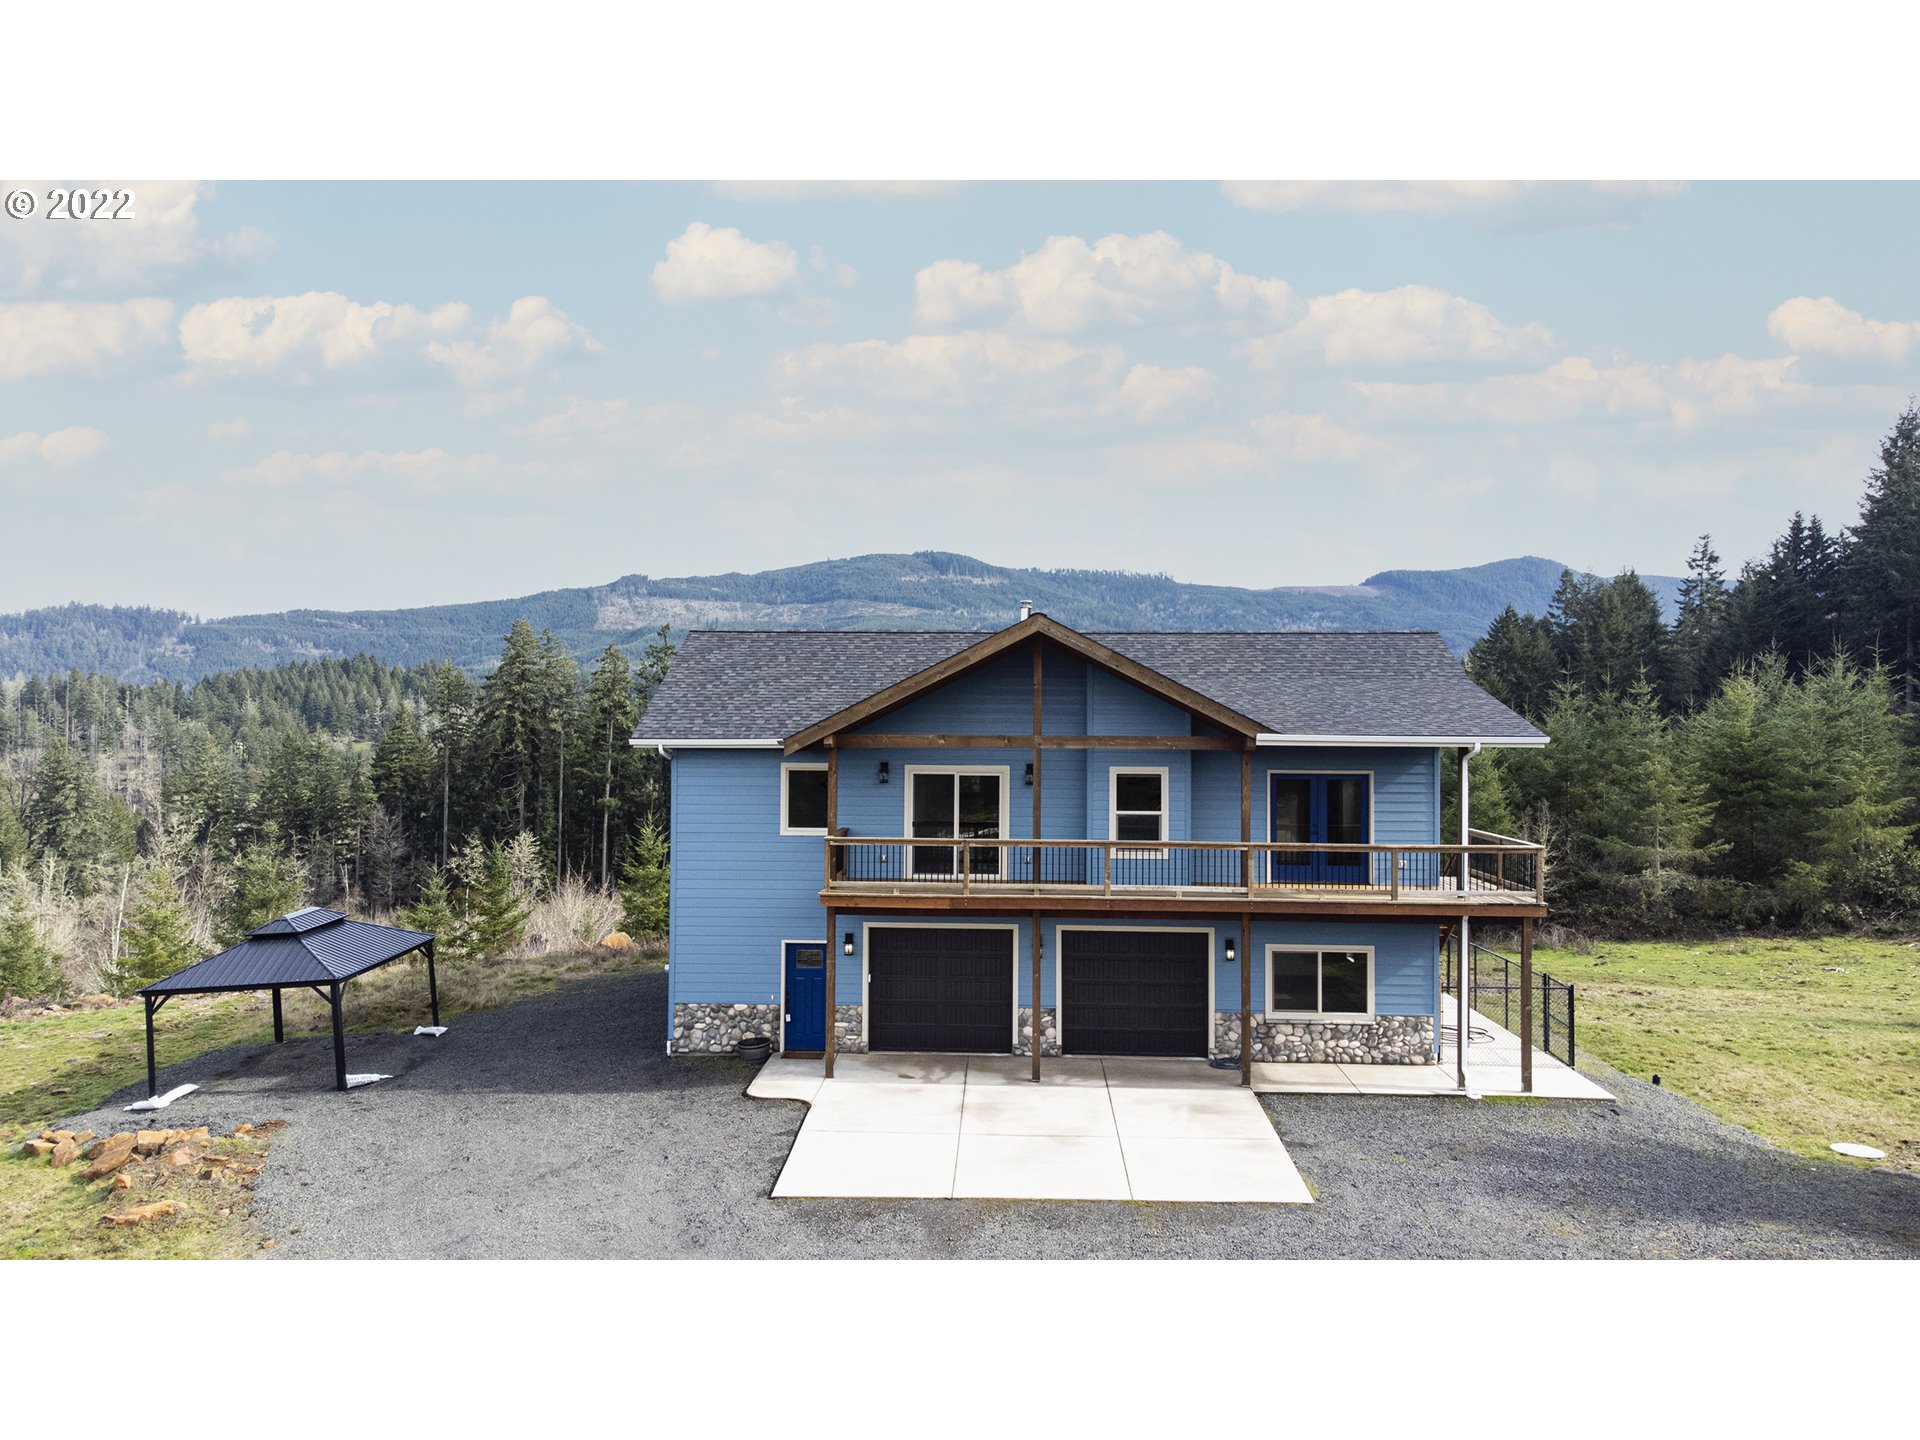 Secluded hilltop retreat with breathtaking views of Spencer's Butte & Mt Pisgah, an easy 15 min from Eugene. Featuring: on demand HW, heated tile floor in the master Bath, 3 skylights & a sun-tunnel for natural light, knotty alder doors/trim, rustic hickory cabinets in the kitchen. Outside is a 120X60 riding arena with 2 stalls & a tack room. Saddle up & ride off into the sunset undisturbed on your very own trails. Entry gate with keypad & remote switch inside. Watch your timber investment grow!